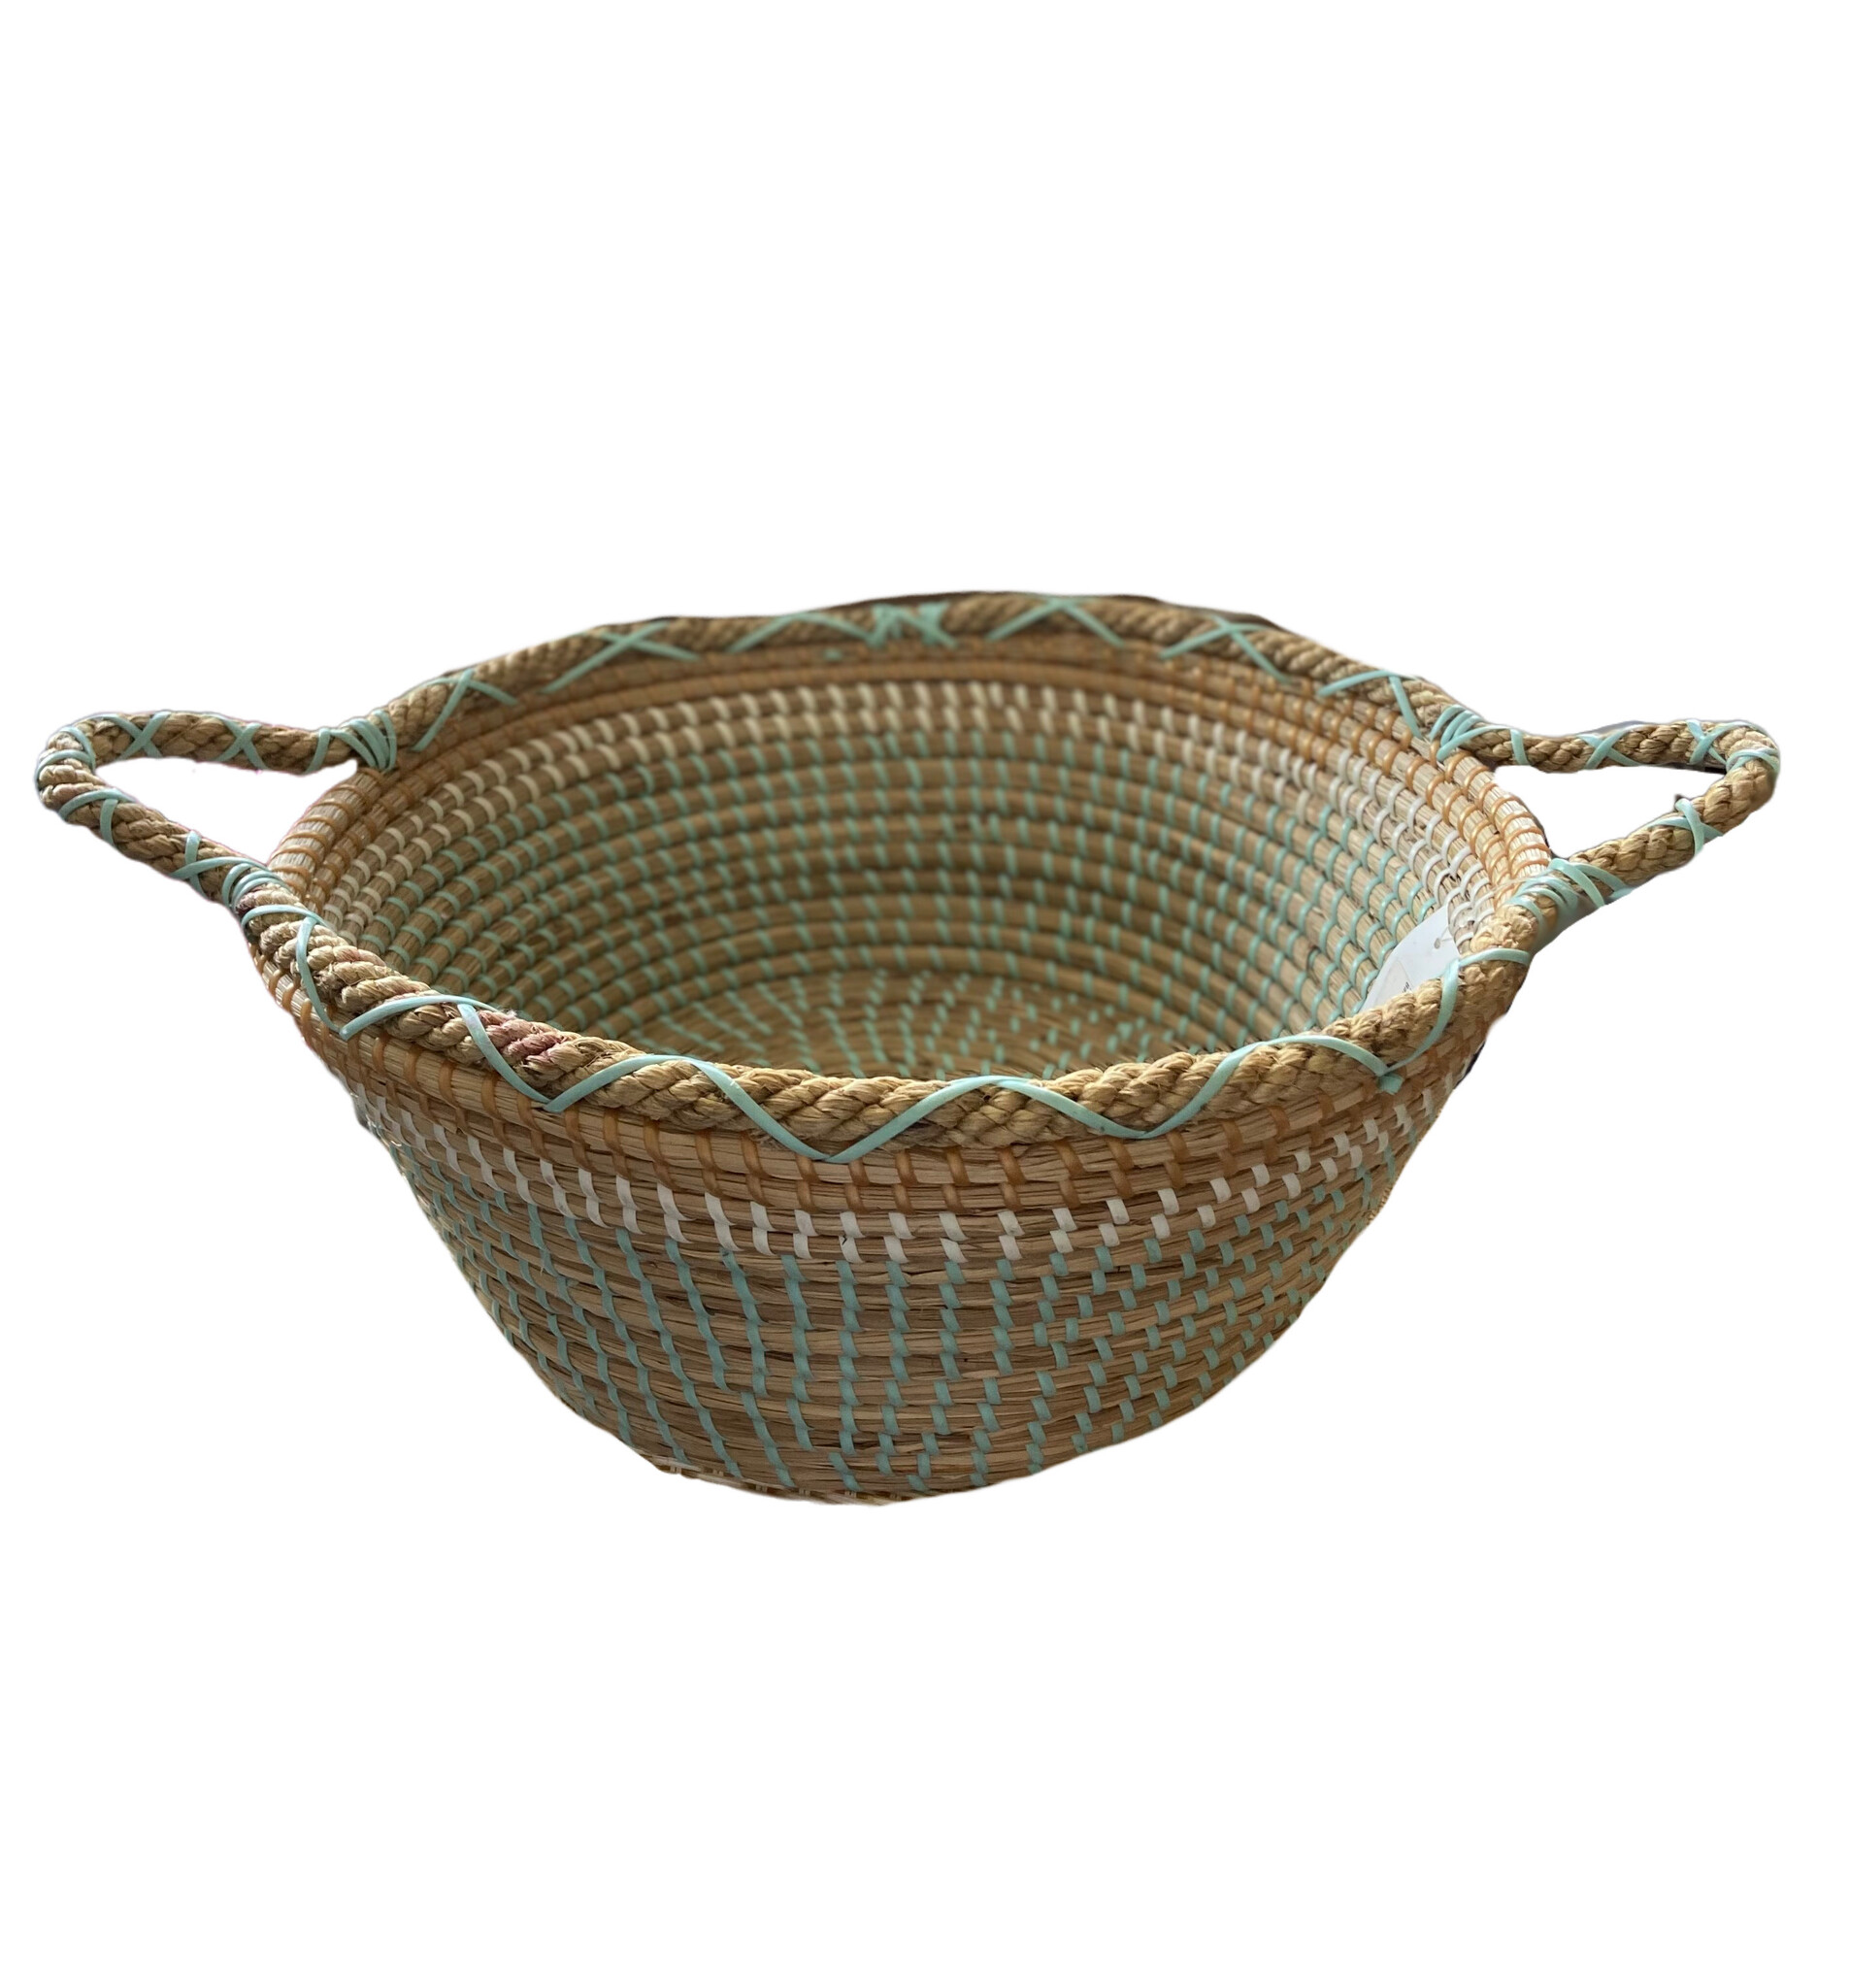 Two's Company Phuket Seagrass Basket Large